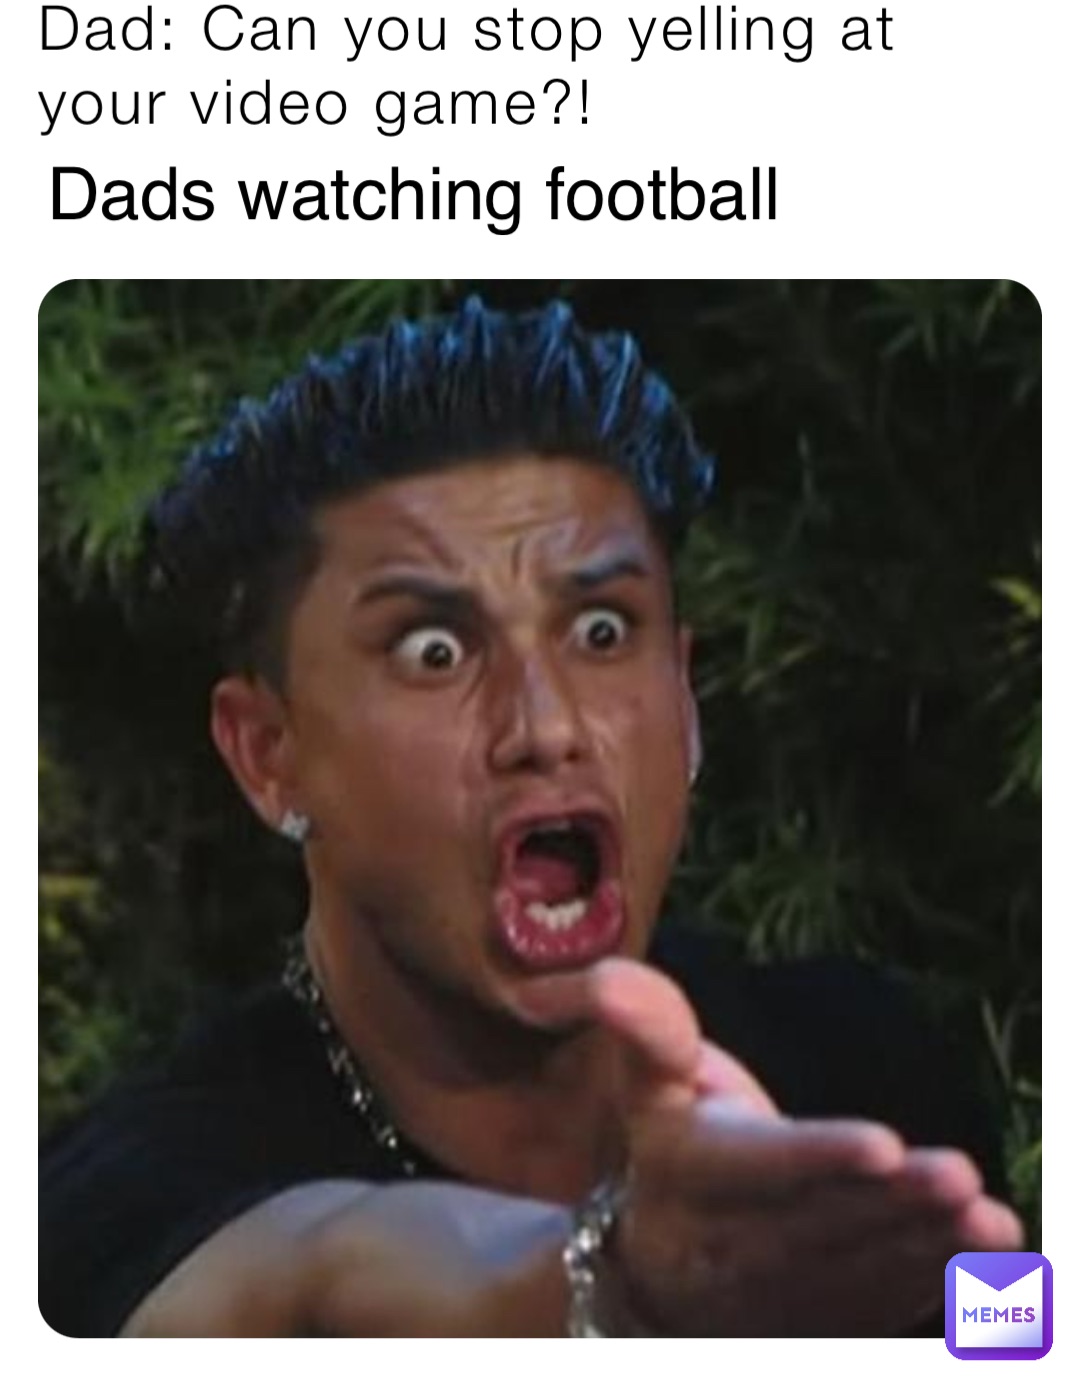 Dad: Can you stop yelling at your video game?! Dads watching football